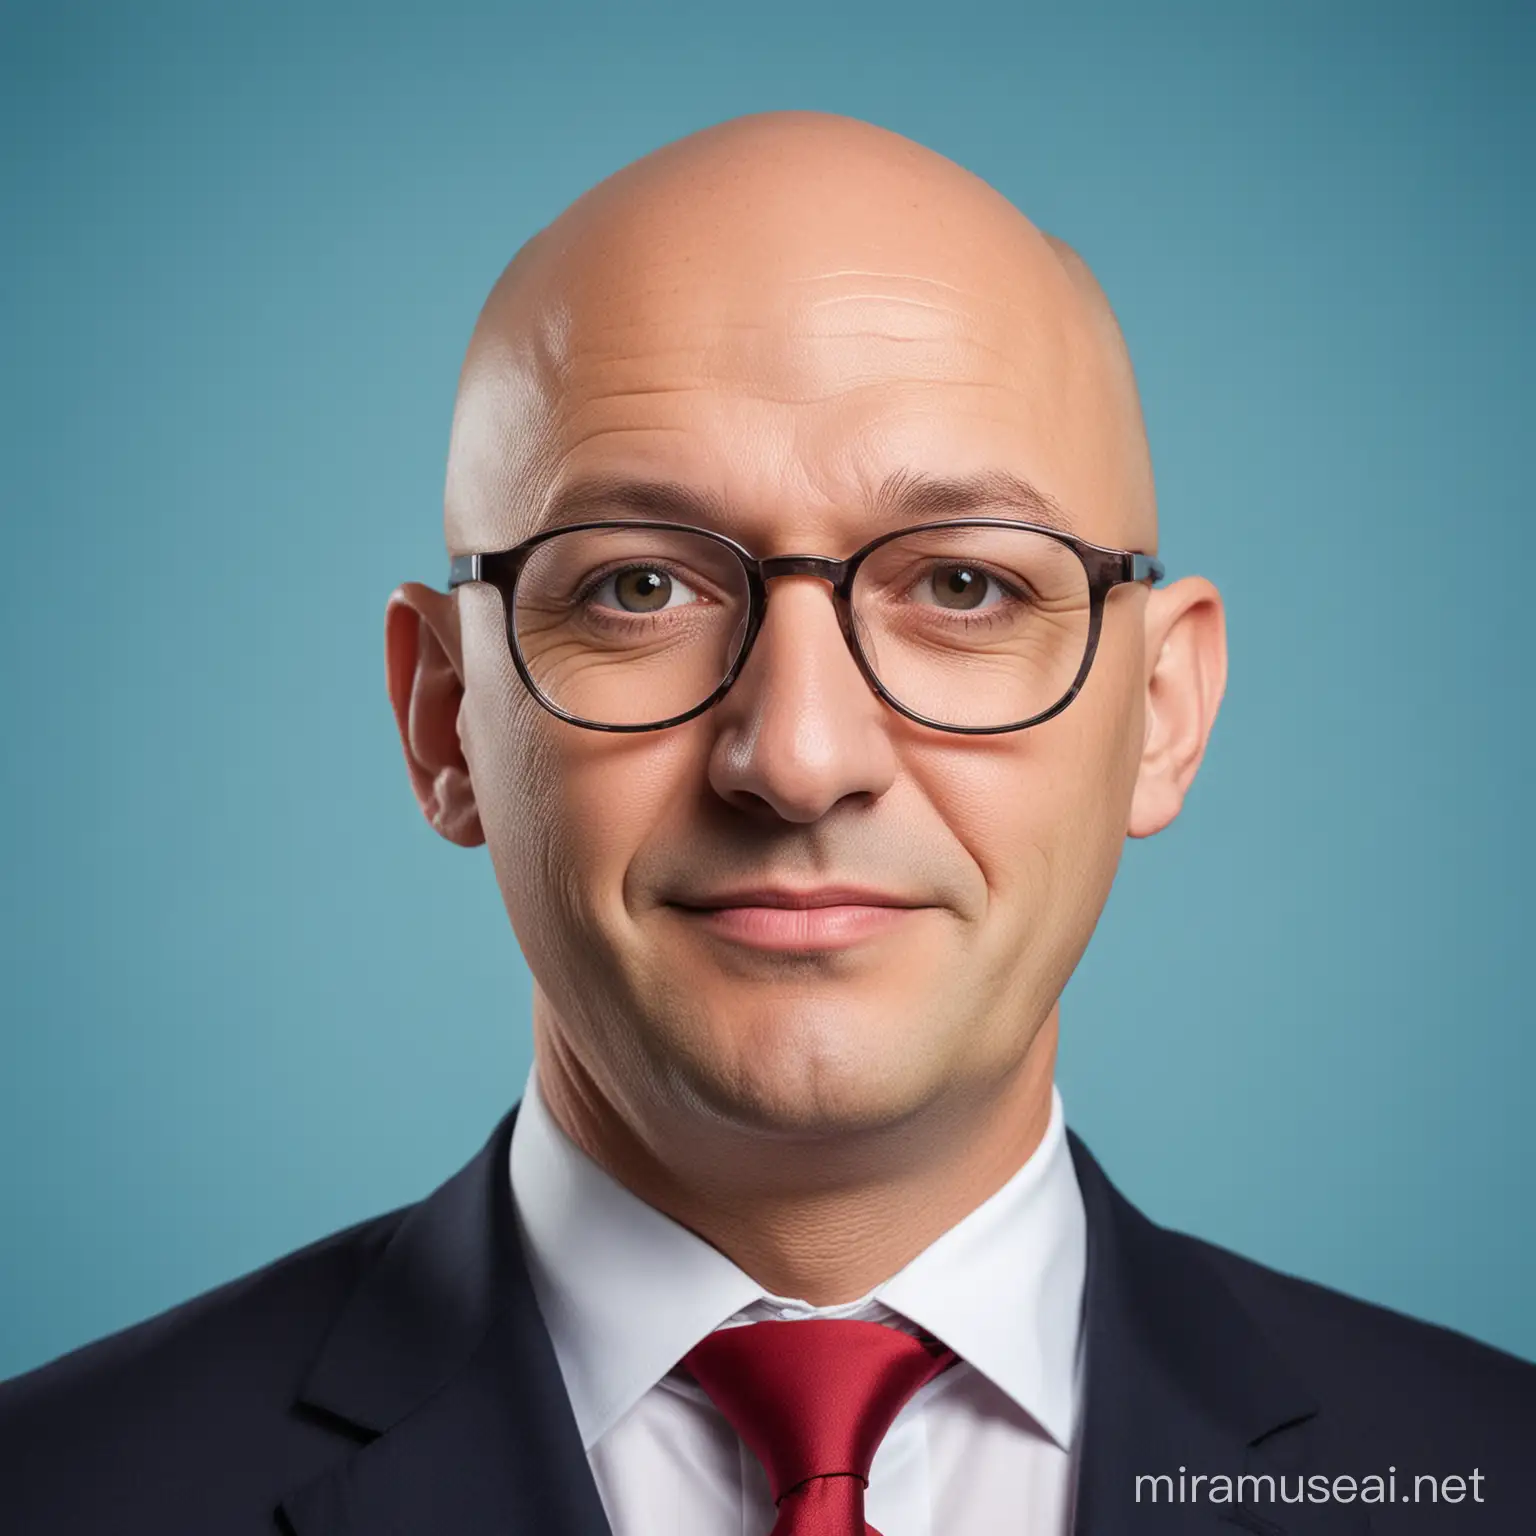 RoundFaced Politician with Glasses on Blue Background